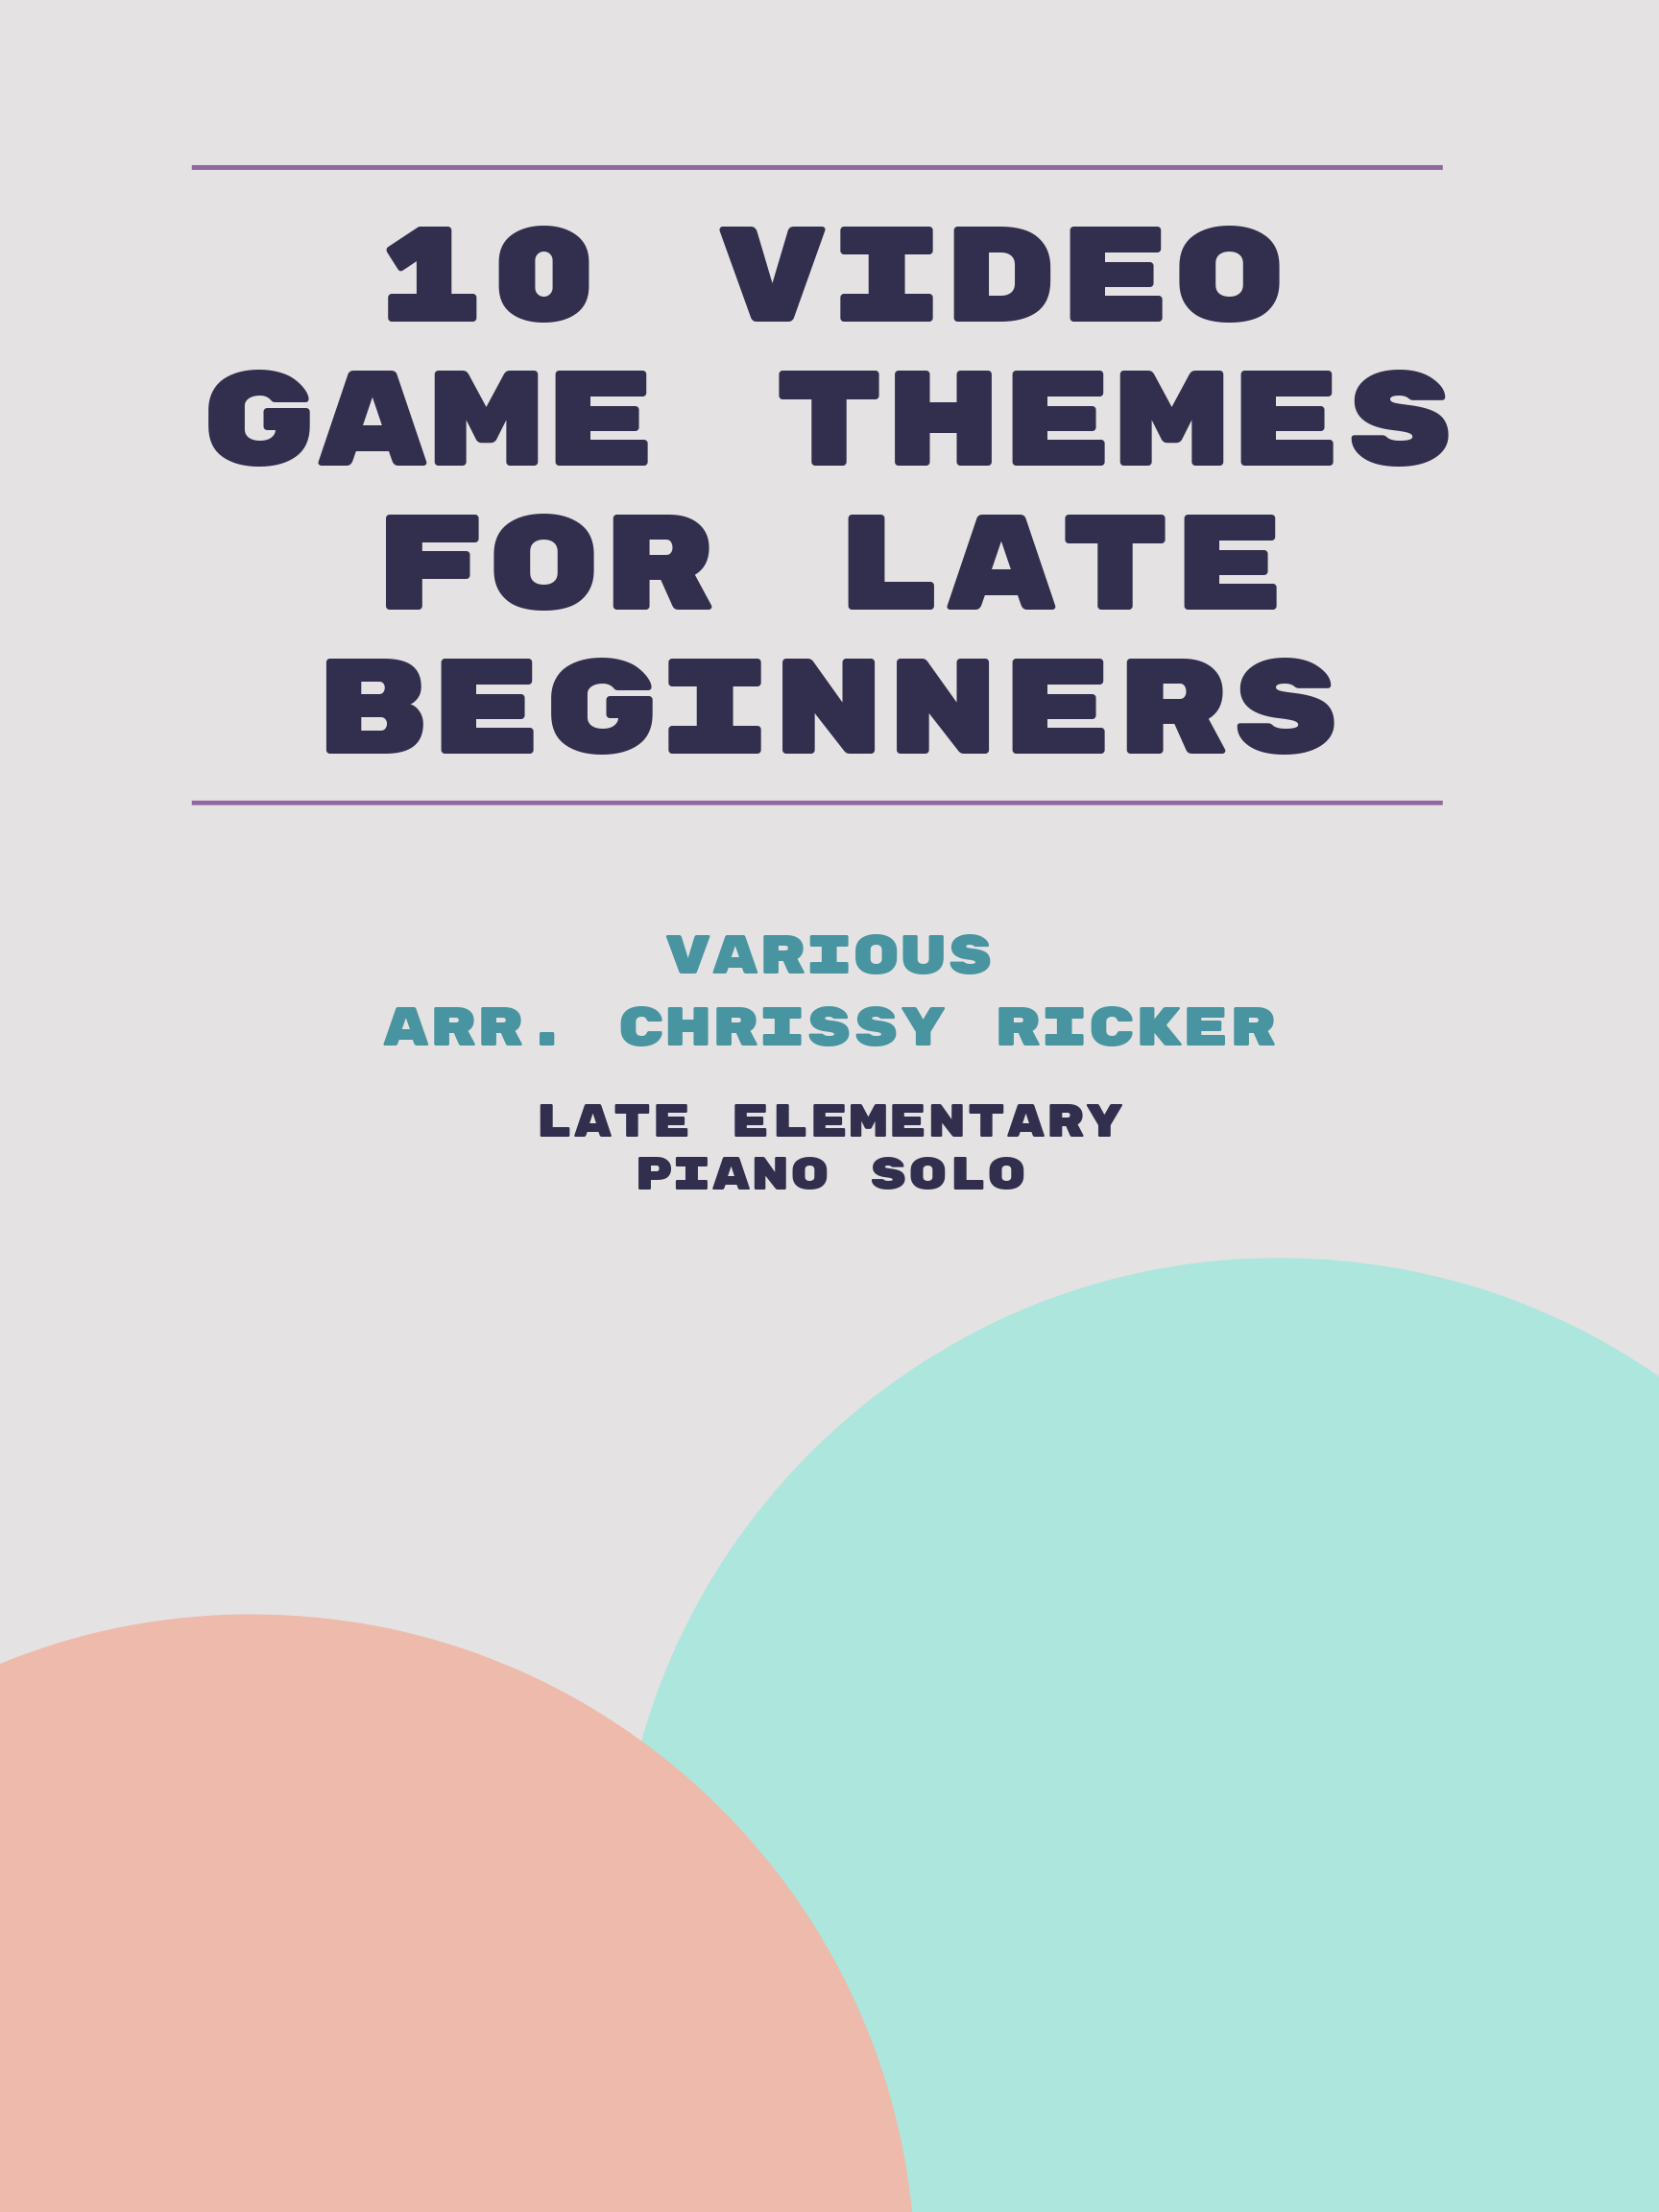 10 Video Game Themes for Late Beginners by Various